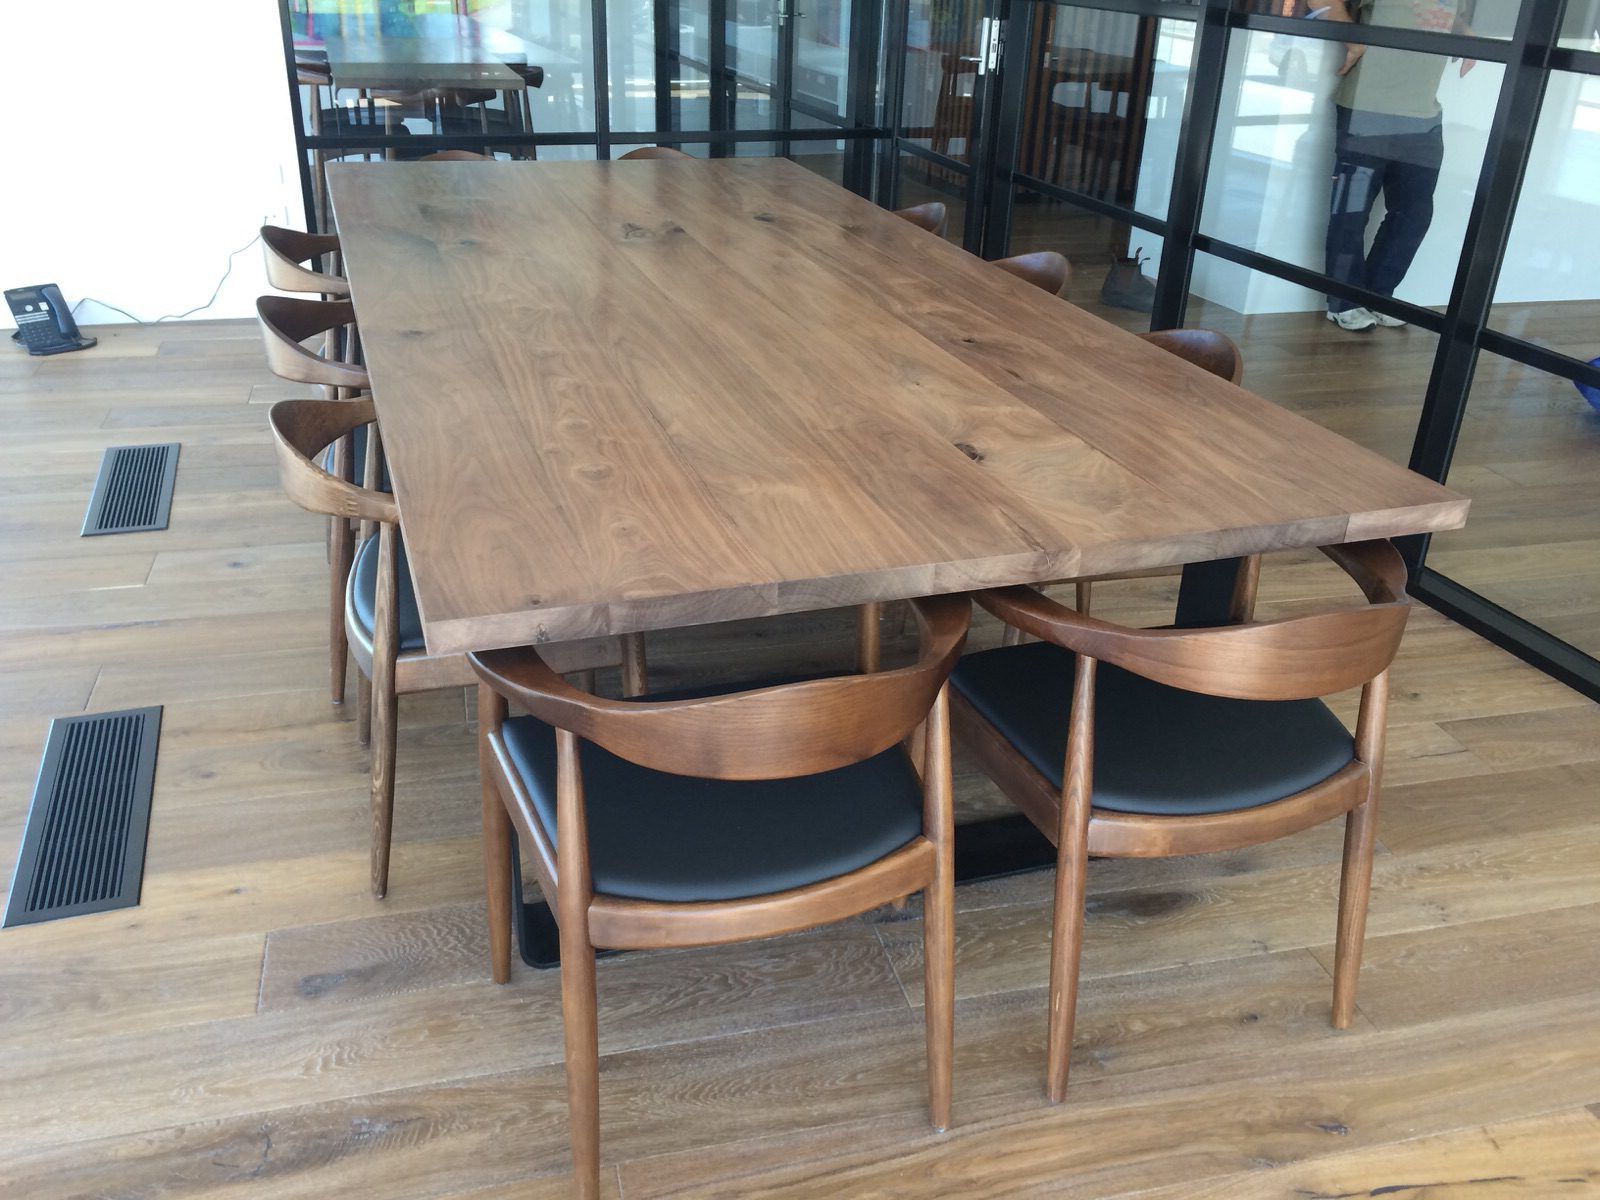 Black And Walnut Dining Tables Throughout Best And Newest King Dining Table American Black Walnut – Lumber Furniture (View 12 of 15)